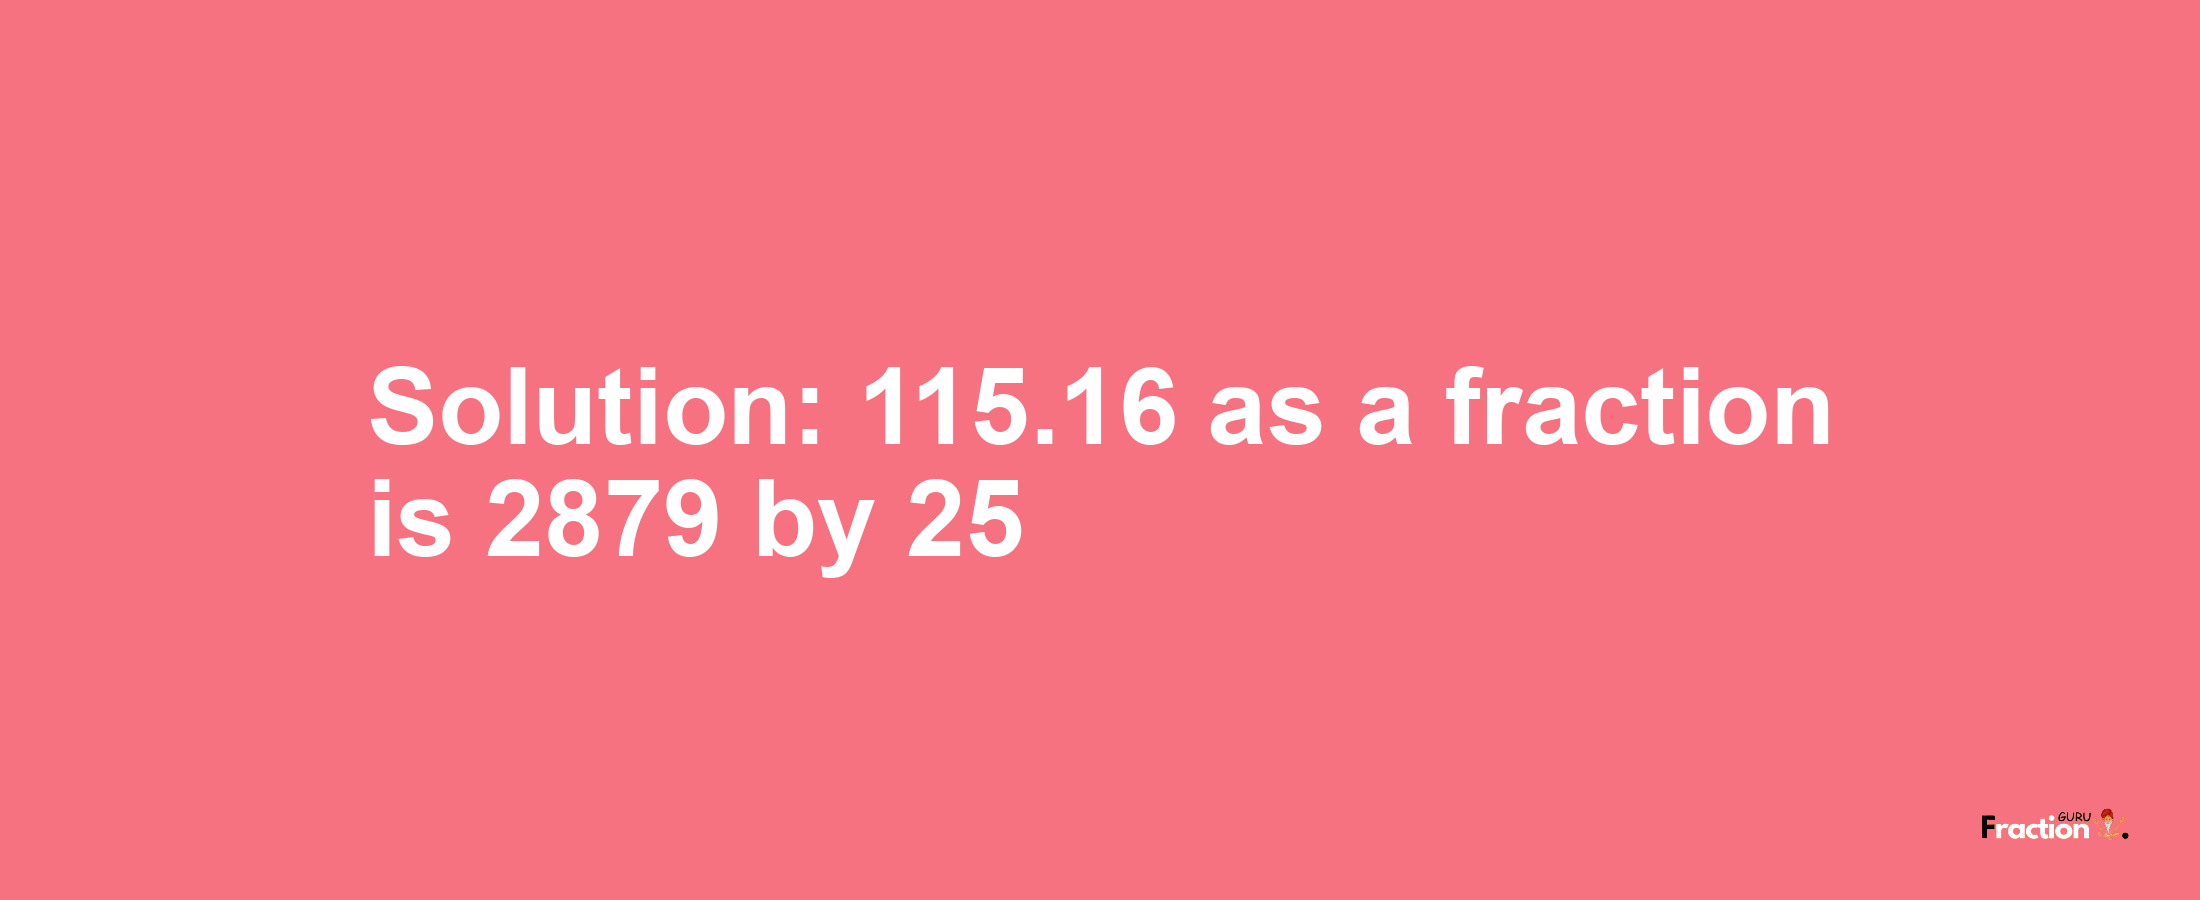 Solution:115.16 as a fraction is 2879/25